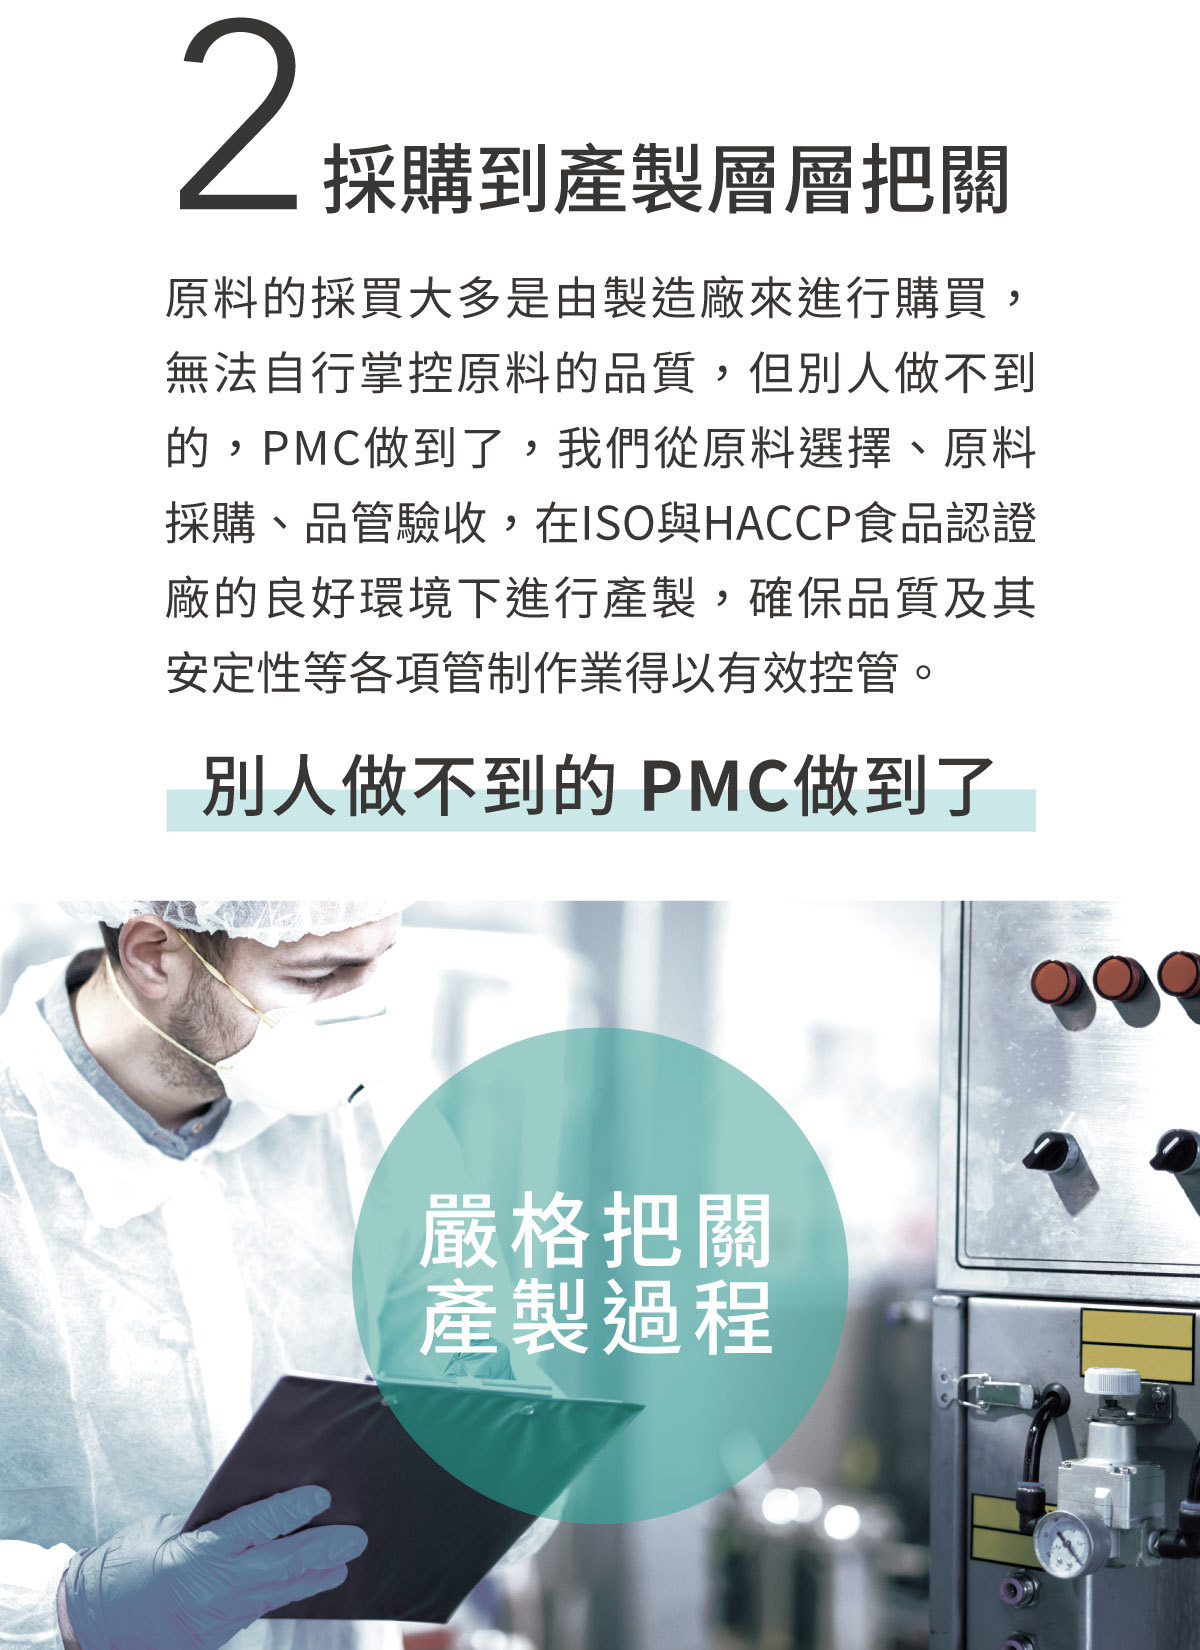 about PMC Nutritional supplements 4